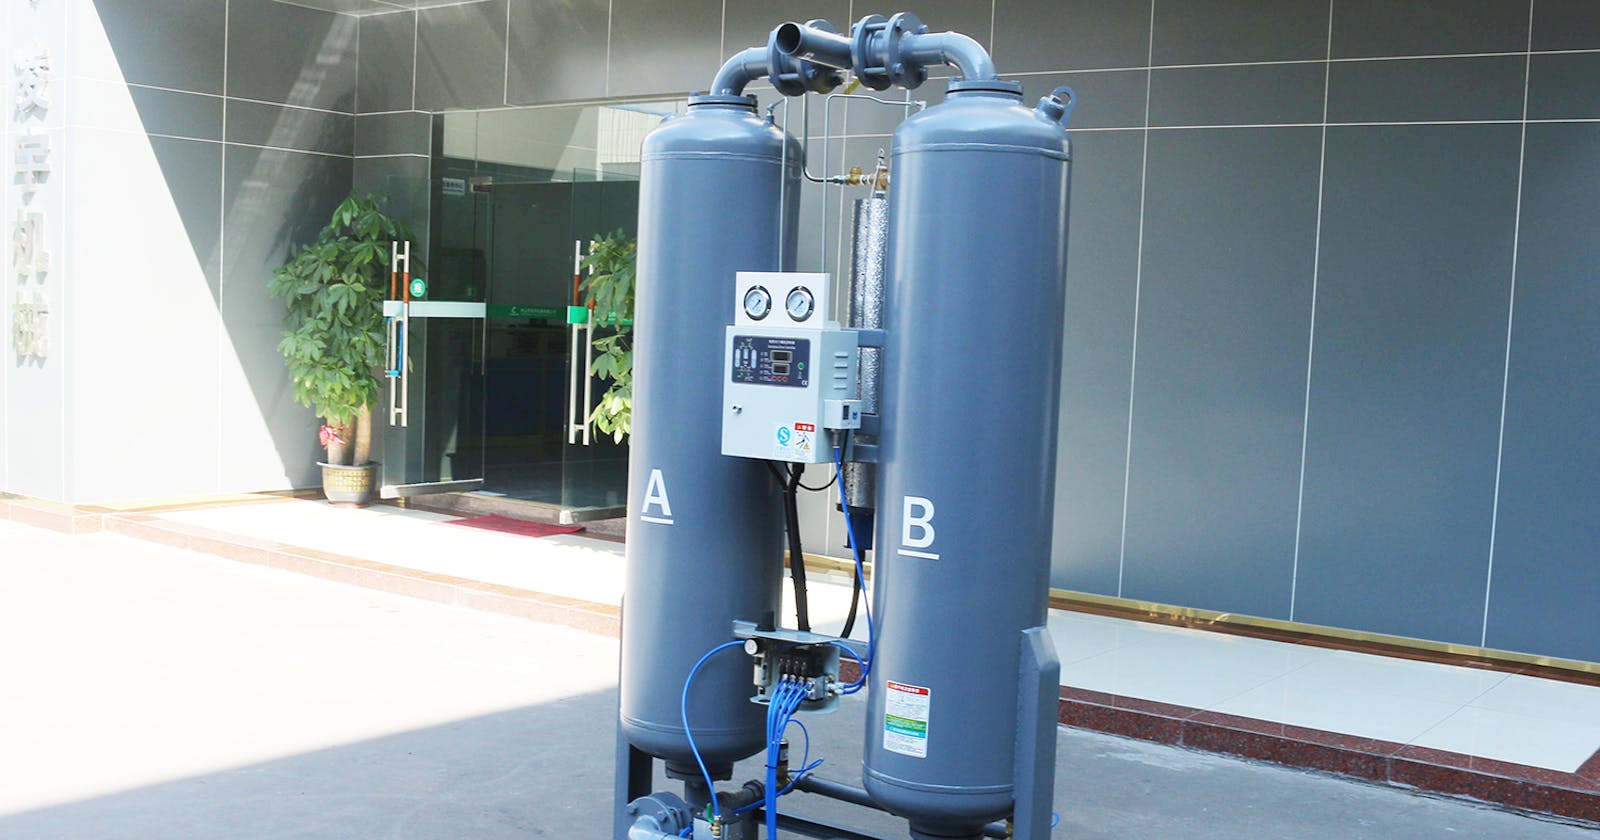 What is desiccant air dryer?